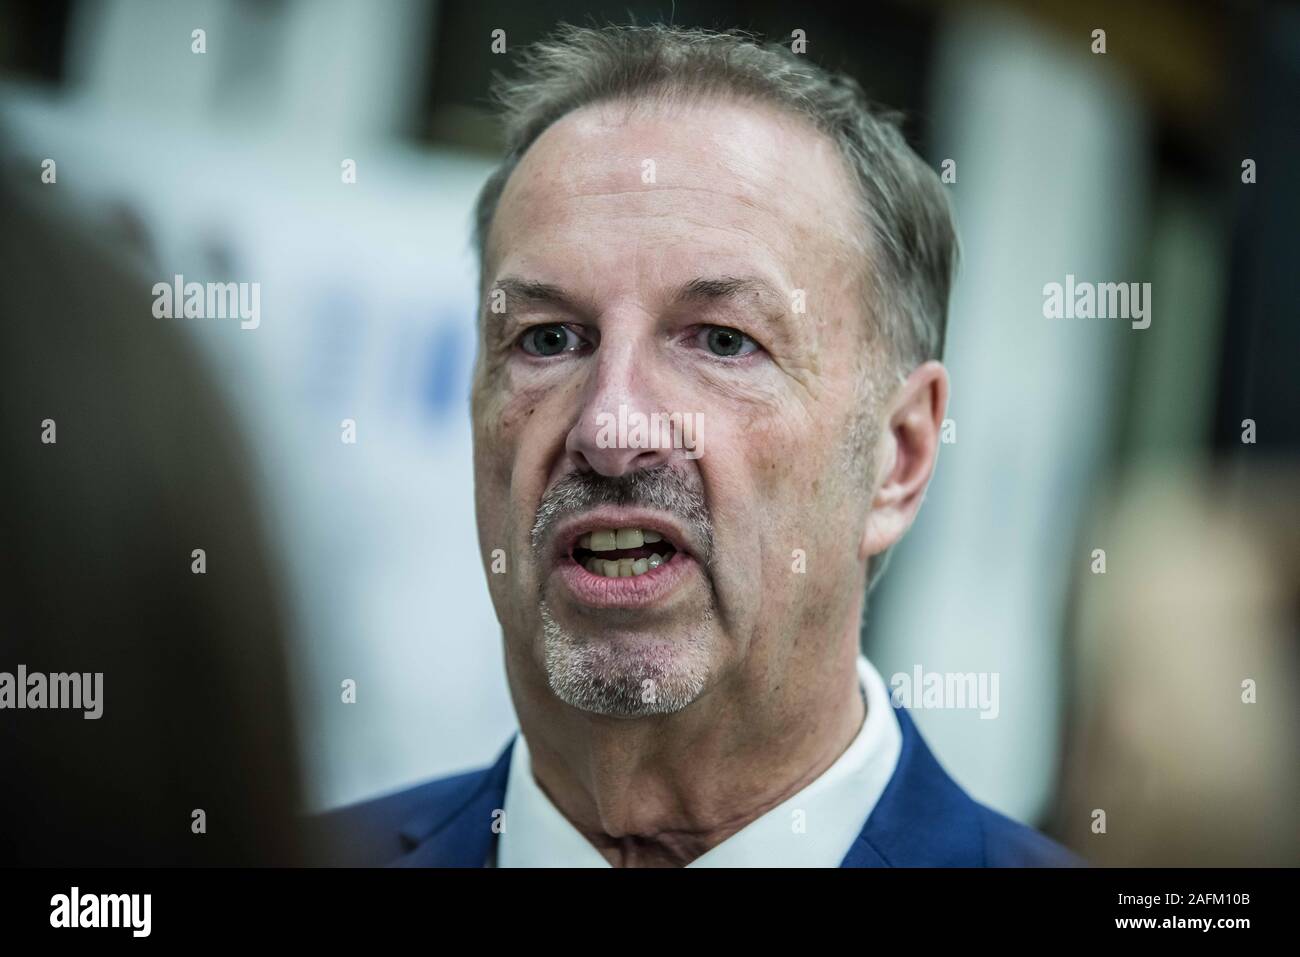 Munich, Bavaria, Germany. 16th Dec, 2019. ROBERT HEIMBERGER, president of the Bayerisches Landeskriminalamt (Bavarian Crime Office). Bavarian Interior Minister Joachim Herrmann, Justice Minister George Eisenreich, Bavarian Landeskriminalamt (Crime Office) preisdent Robert Heimberger, and Bavarian Attorney General Reinhard RÃ¶ttle (Reinhard Roettle) presented the results of the war on organized crime in Bavaria, In 2018 alone, the damages to the state totaled some 169 million Euros, a staggering increase from 2017's figure of 12 million. Processes against organized crime have cost the st Stock Photo